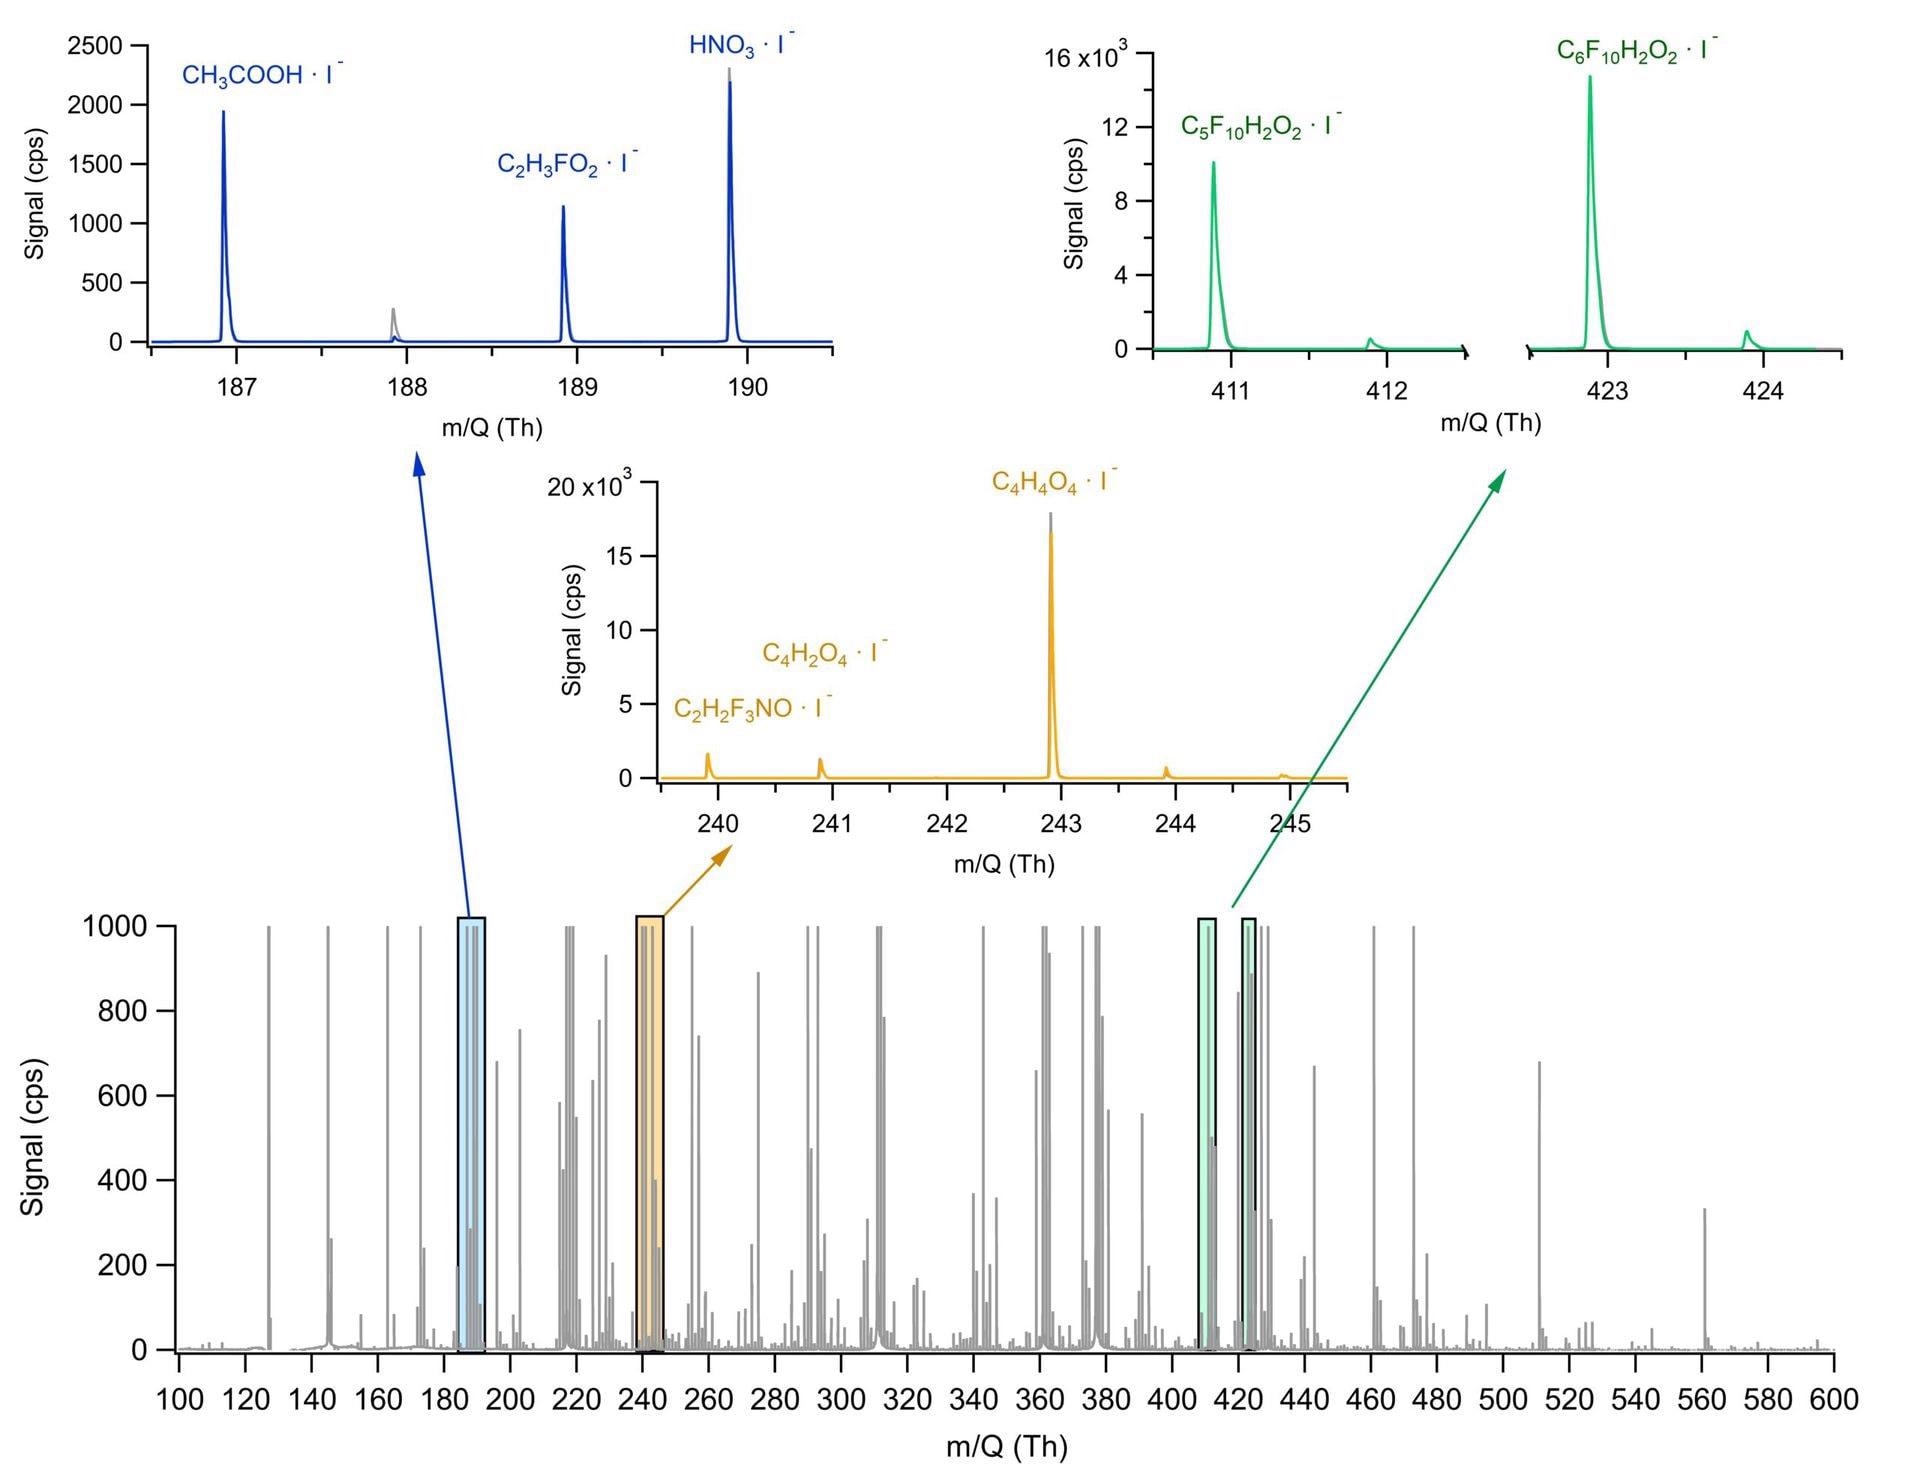 Spectrum from sampling point B. Examples of molecules found in the low (blue), middle (orange) and high (green) mass range. Tentatively assigned molecules: acetic acid (CH3COOH), fluoroacetaldehyde (C2H3FO2), nitric acid (HNO3), trifluoroacetamide (C2H2F3NO), acetylanedicarboxylic acid (C4H2O4), maleic acid (C4H4O4), Per- and polyfluoroalkyl substances, PFAS (C5F10H2O2 and C6H10H2O2).